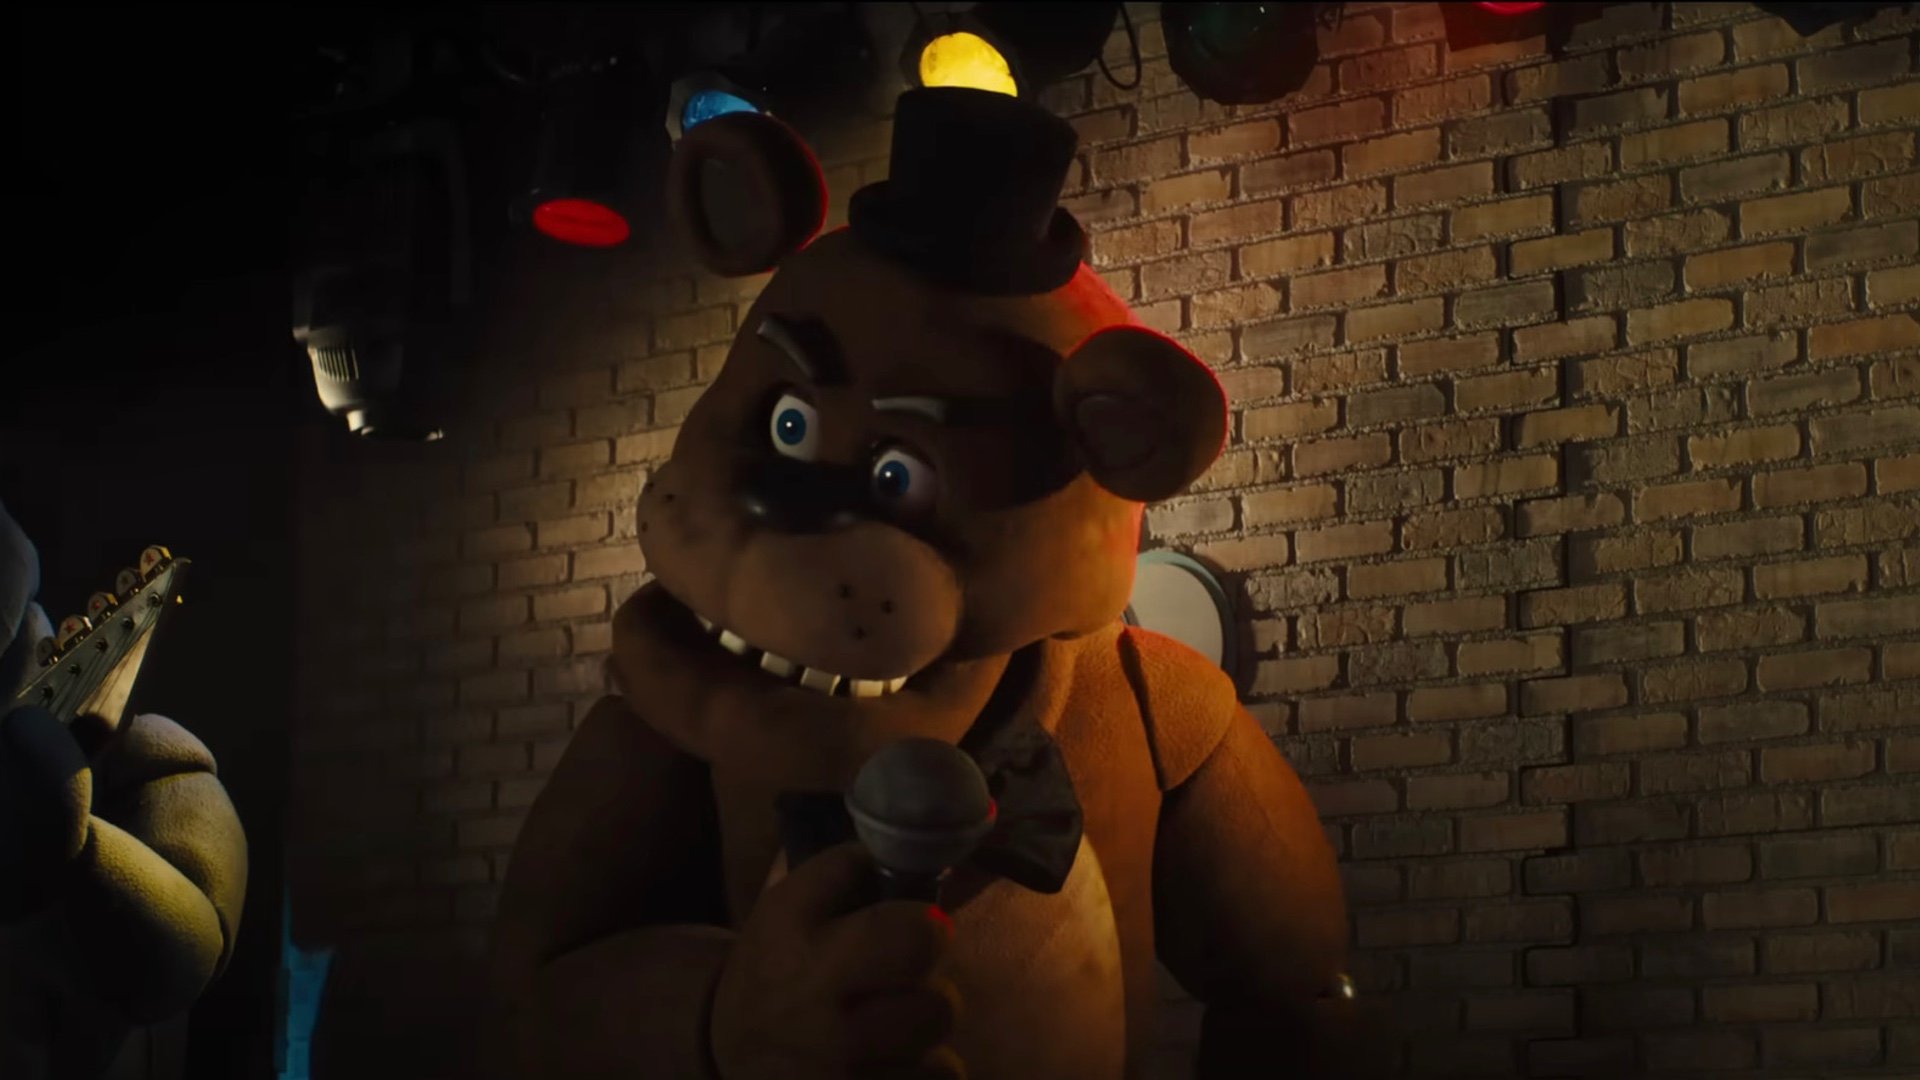 Four New TV Spots For FIVE NIGHTS AT FREDDY'S Tease Killer